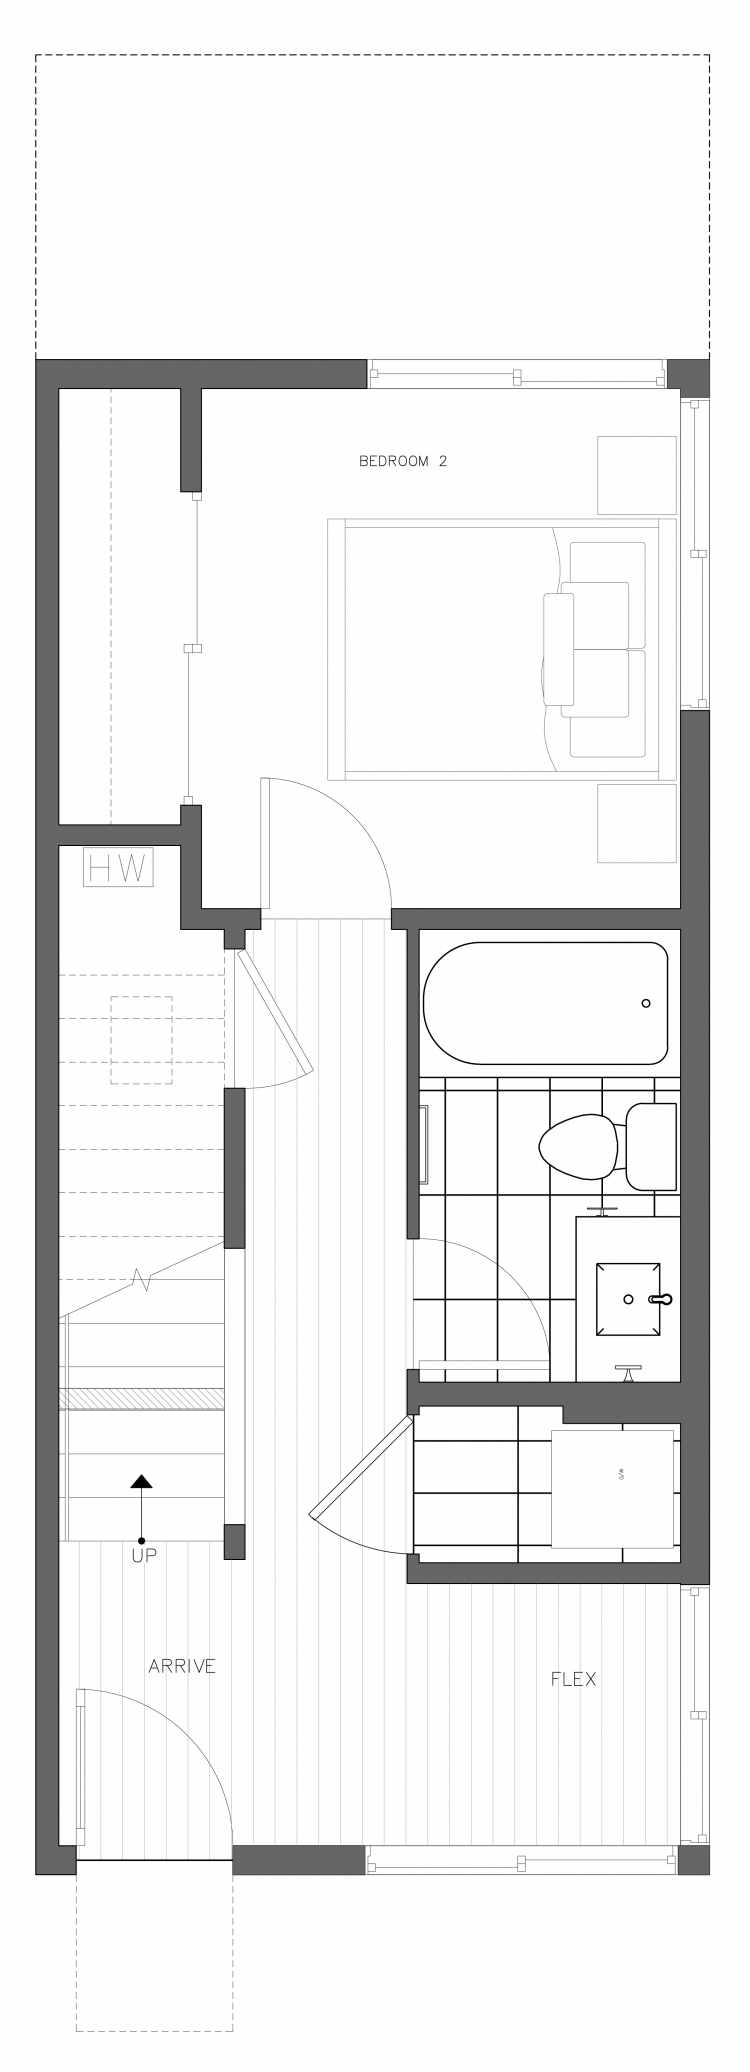 First Floor Plan of 3406D 15th Ave W, One of the Arlo Townhomes in North Queen Anne